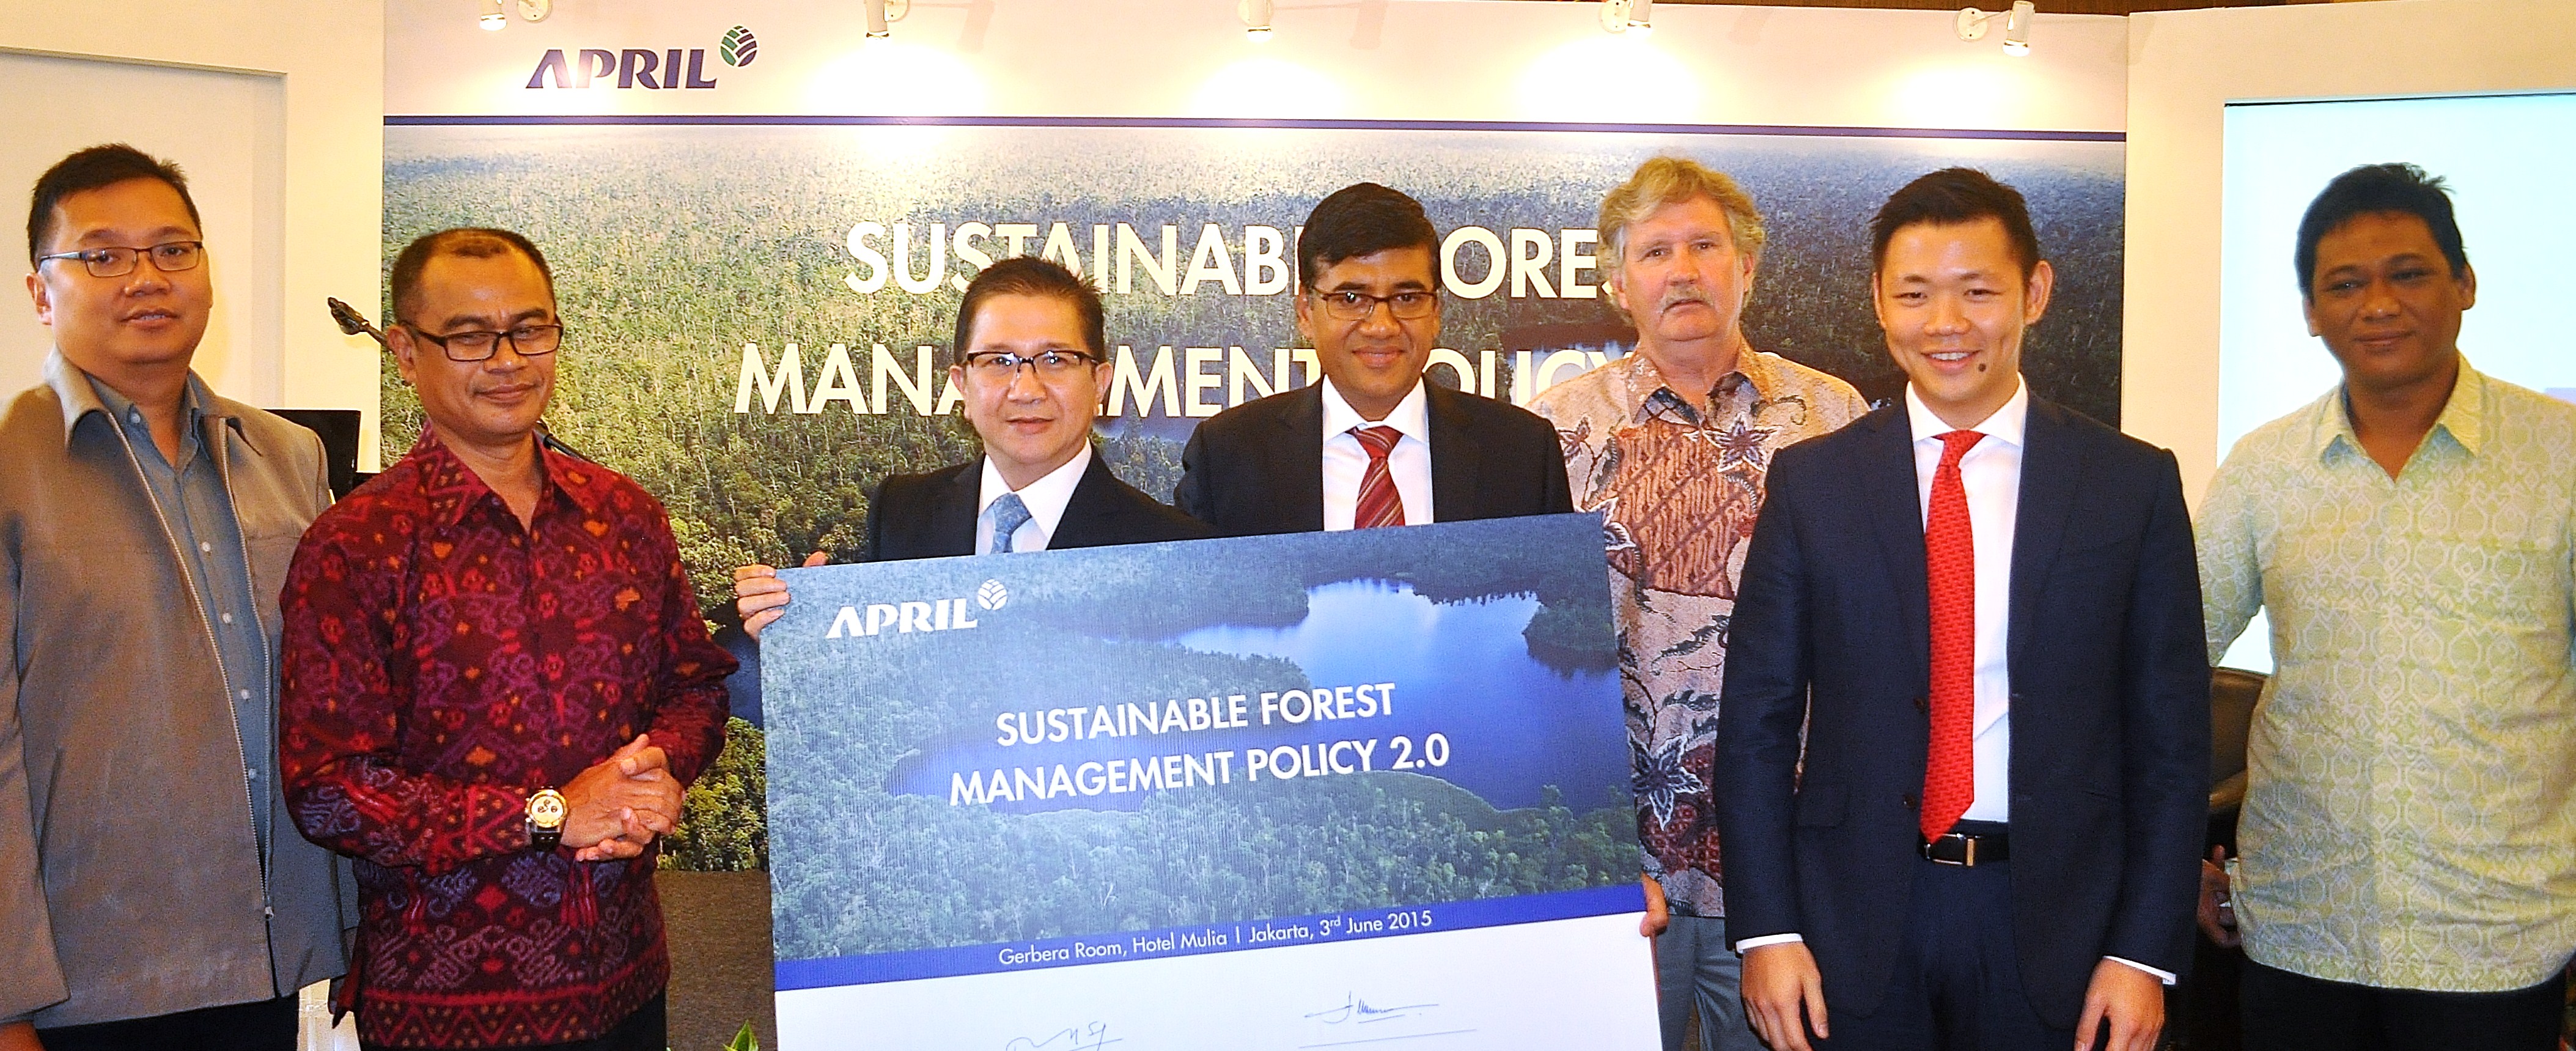 From left to right: Aditya Bayunanda WWF Indonesia, Ida Bagus Putera Parthama Director General Sustainable Forest Management Ministry of Environment and Forestry, President Director PT. Riau Andalan Pulp and Paper (RAPP) Tony Wenas, President APRIL Praveen Singhavi, Chairman of Stakeholder Advisory Committee (SAC) Joseph Lawson, RGE Director Anderson Tanoto, Greenpeace Bustar Maitar 